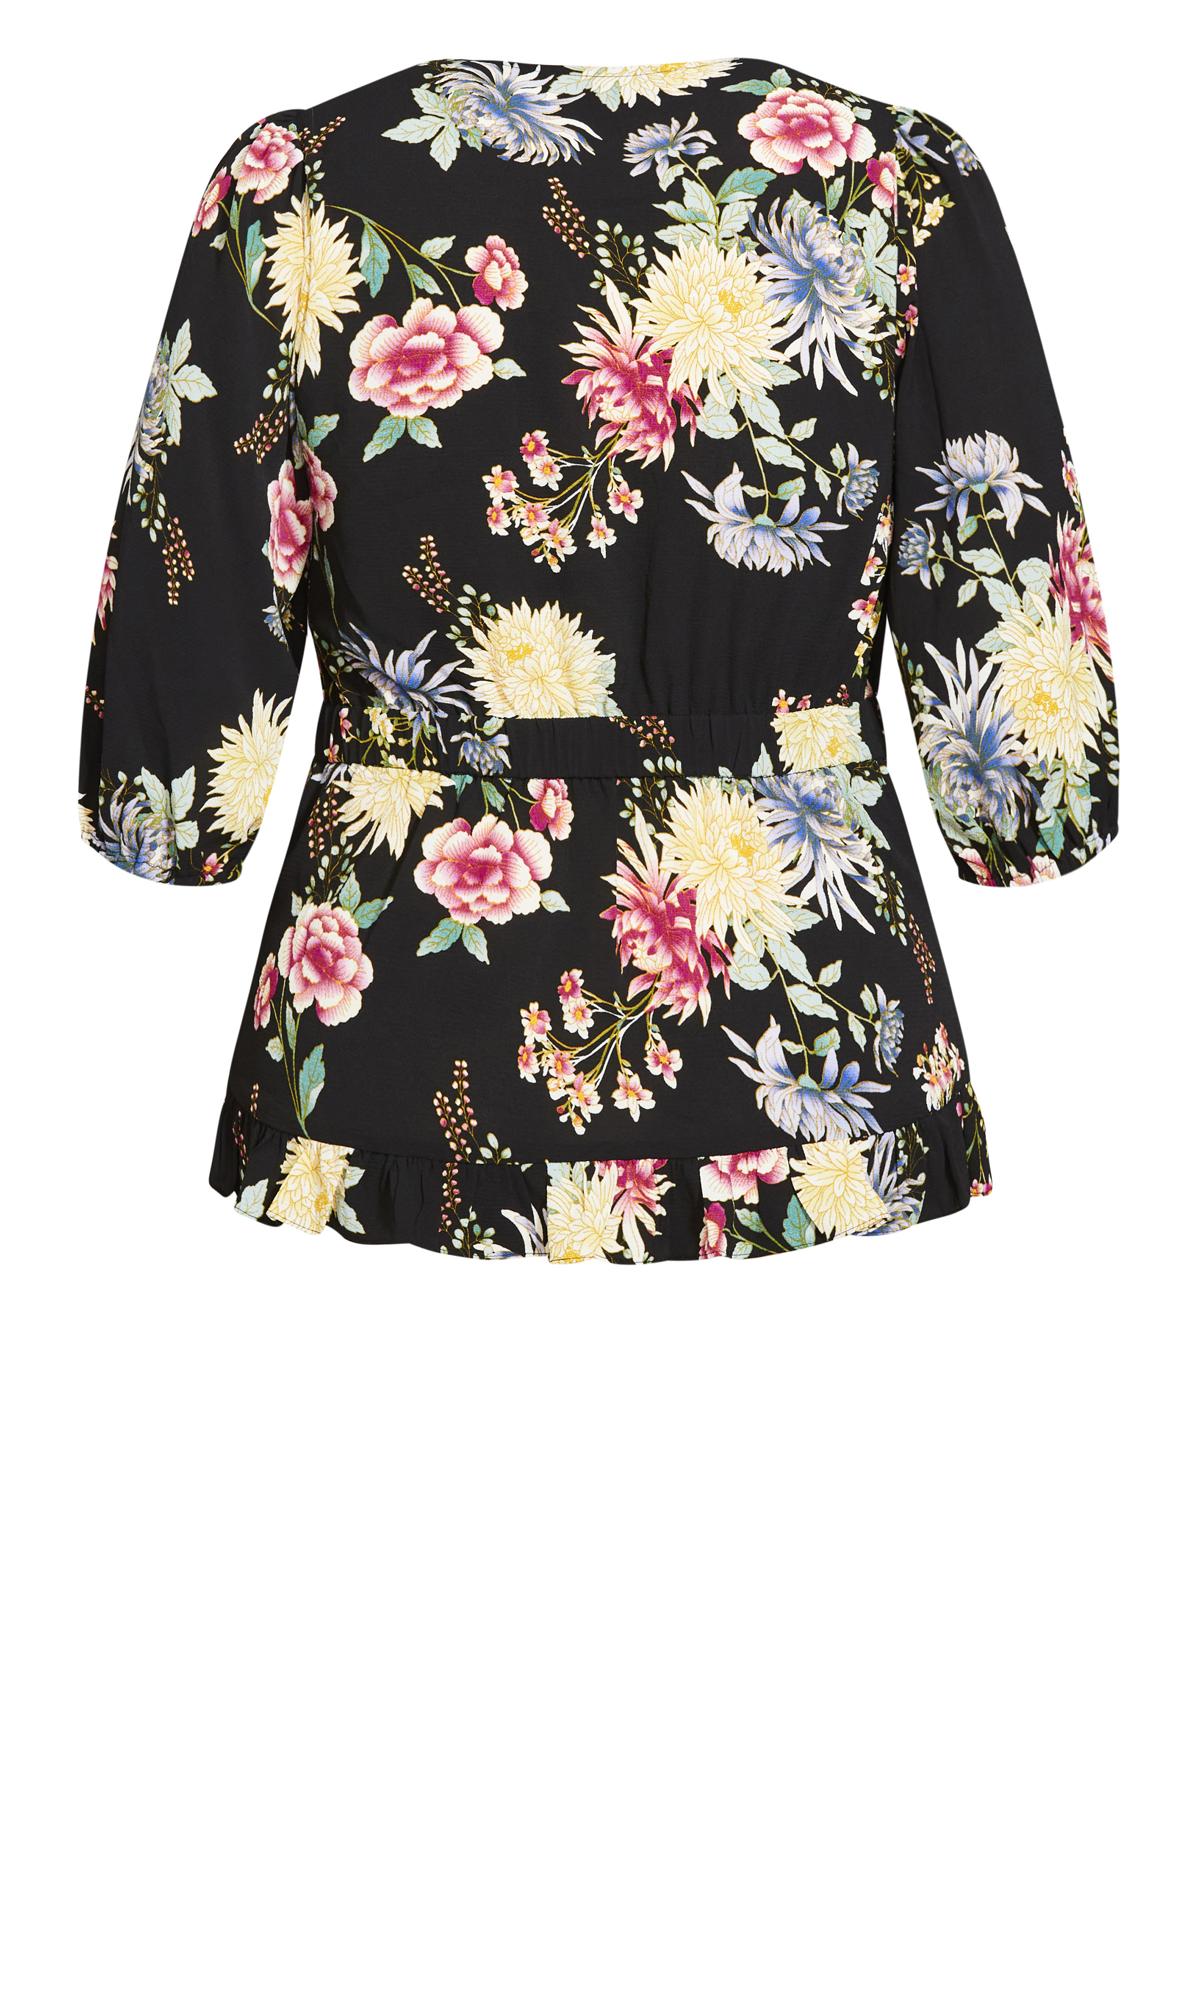 Black Floral Fit And Flare Top